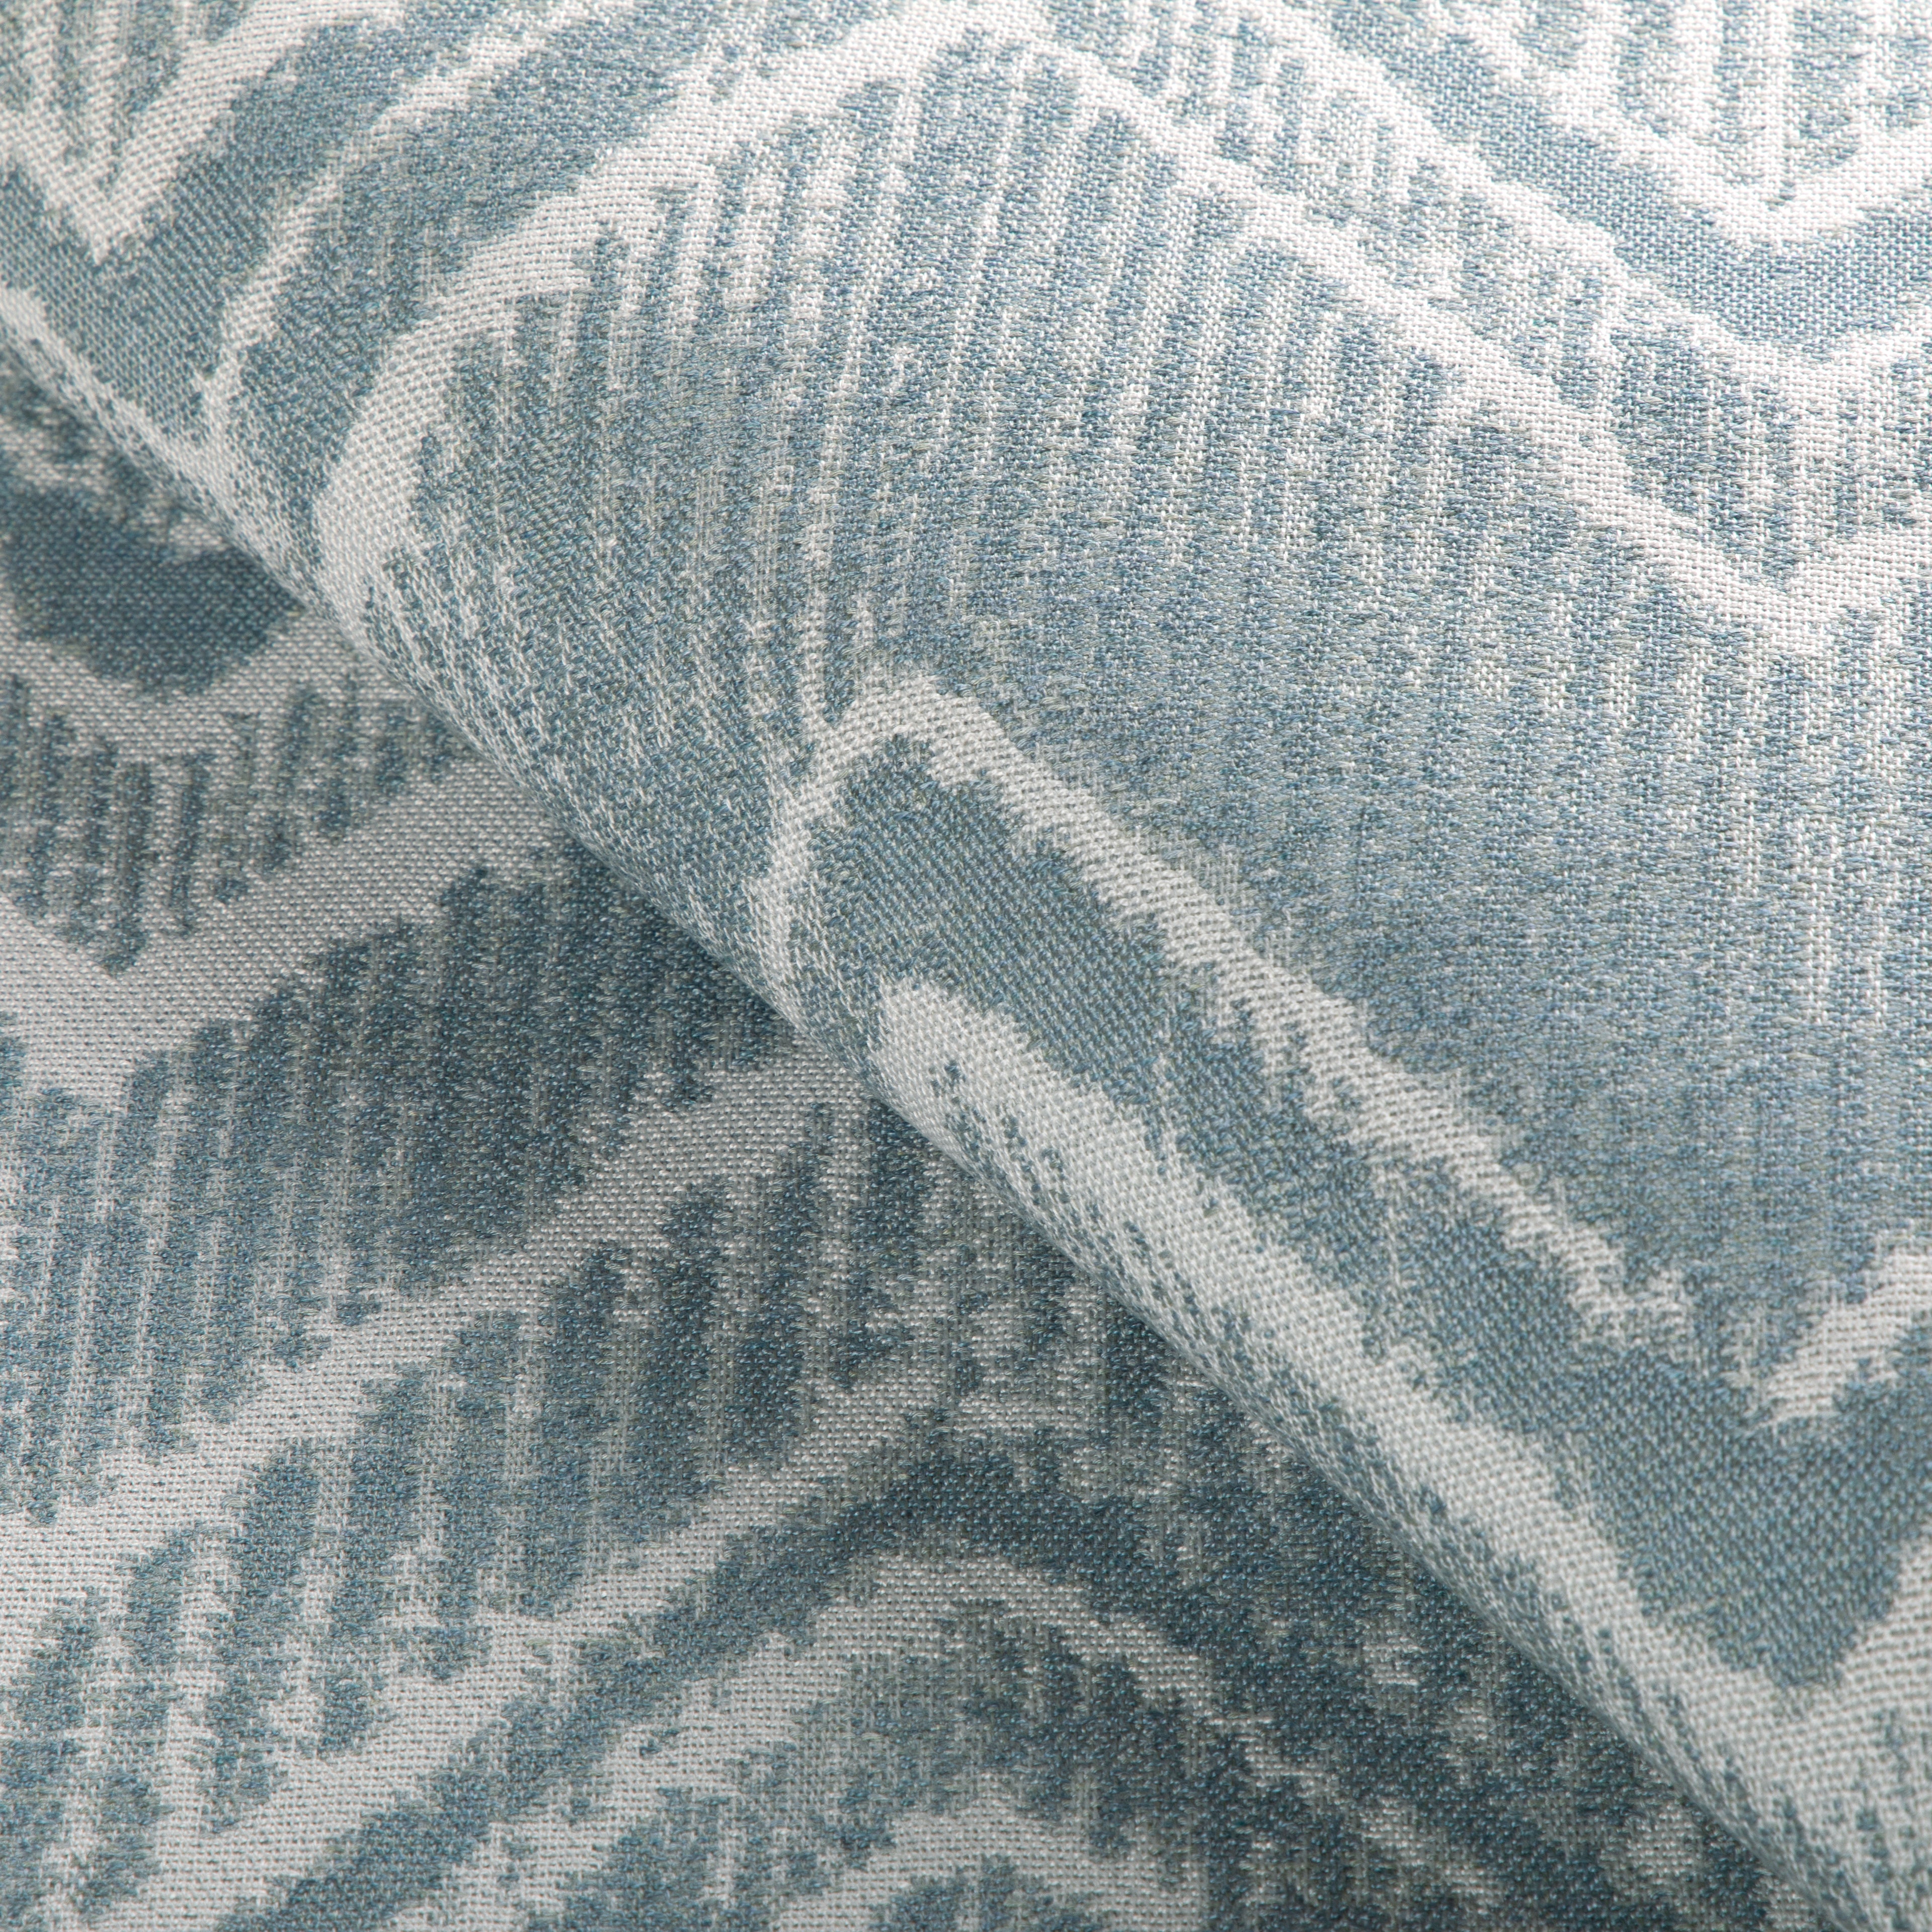 Alternate view of Riviera Batik fabric in sky color - pattern 36934.135.0 - by Kravet Couture in the Riviera collection